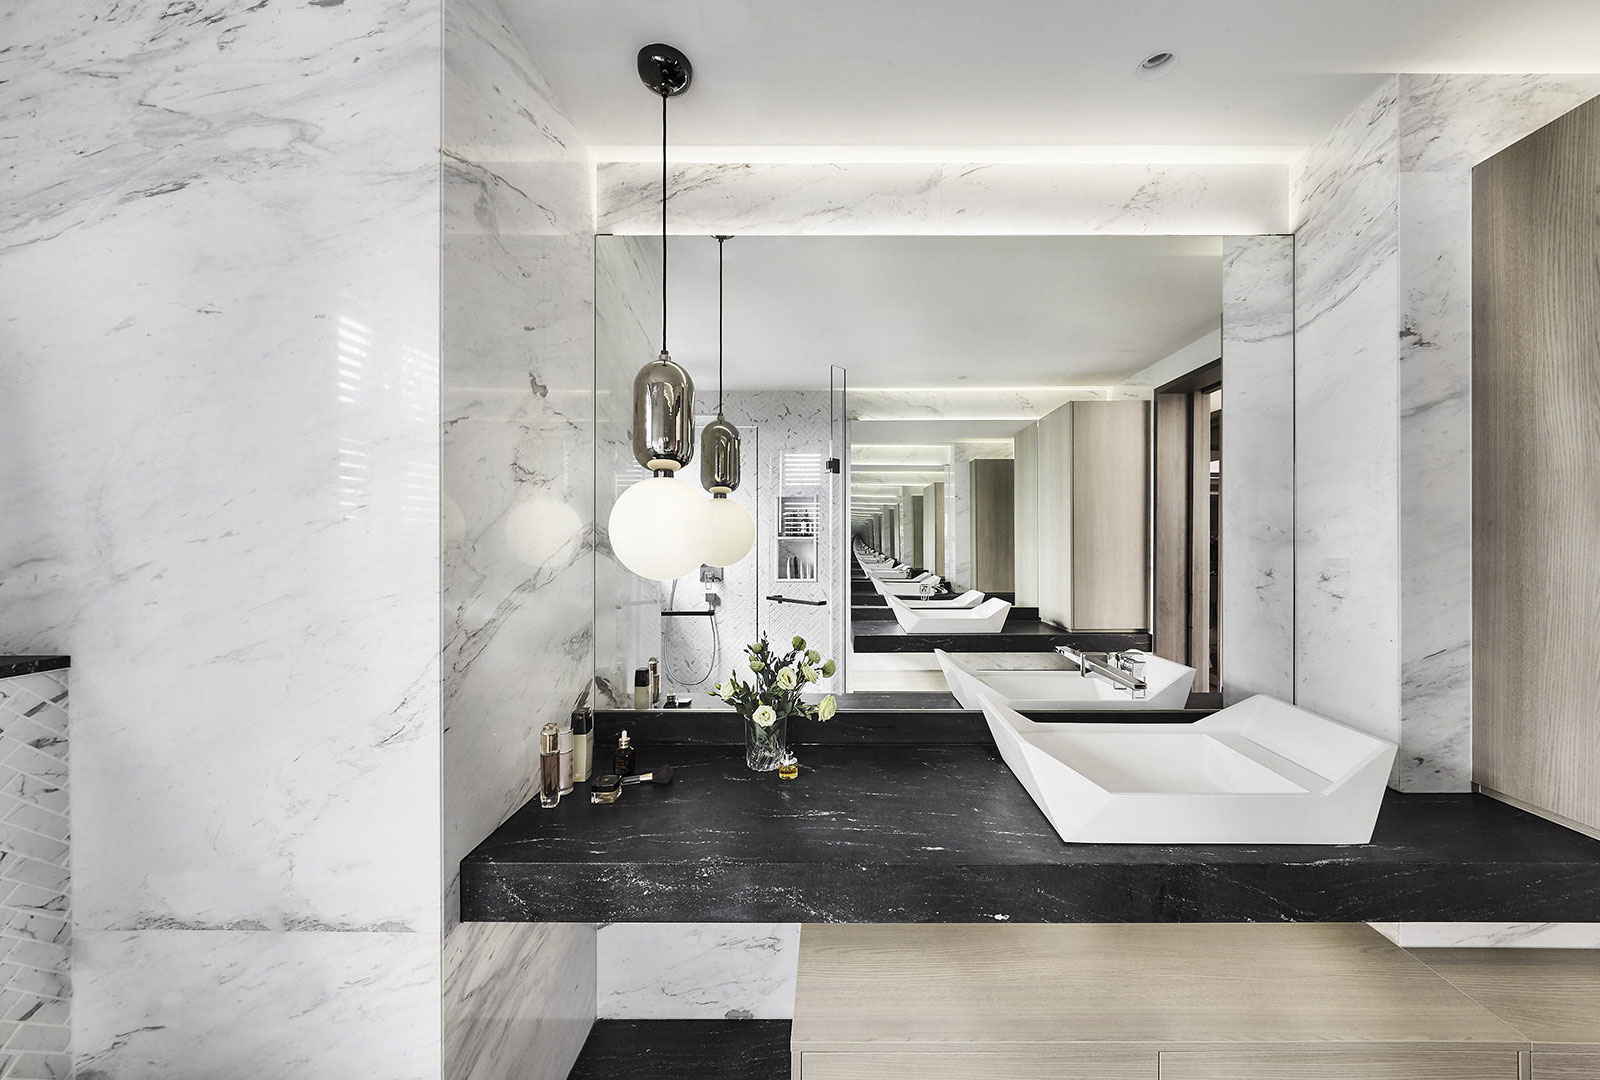 A bathroom with marble counter tops and a black sink.